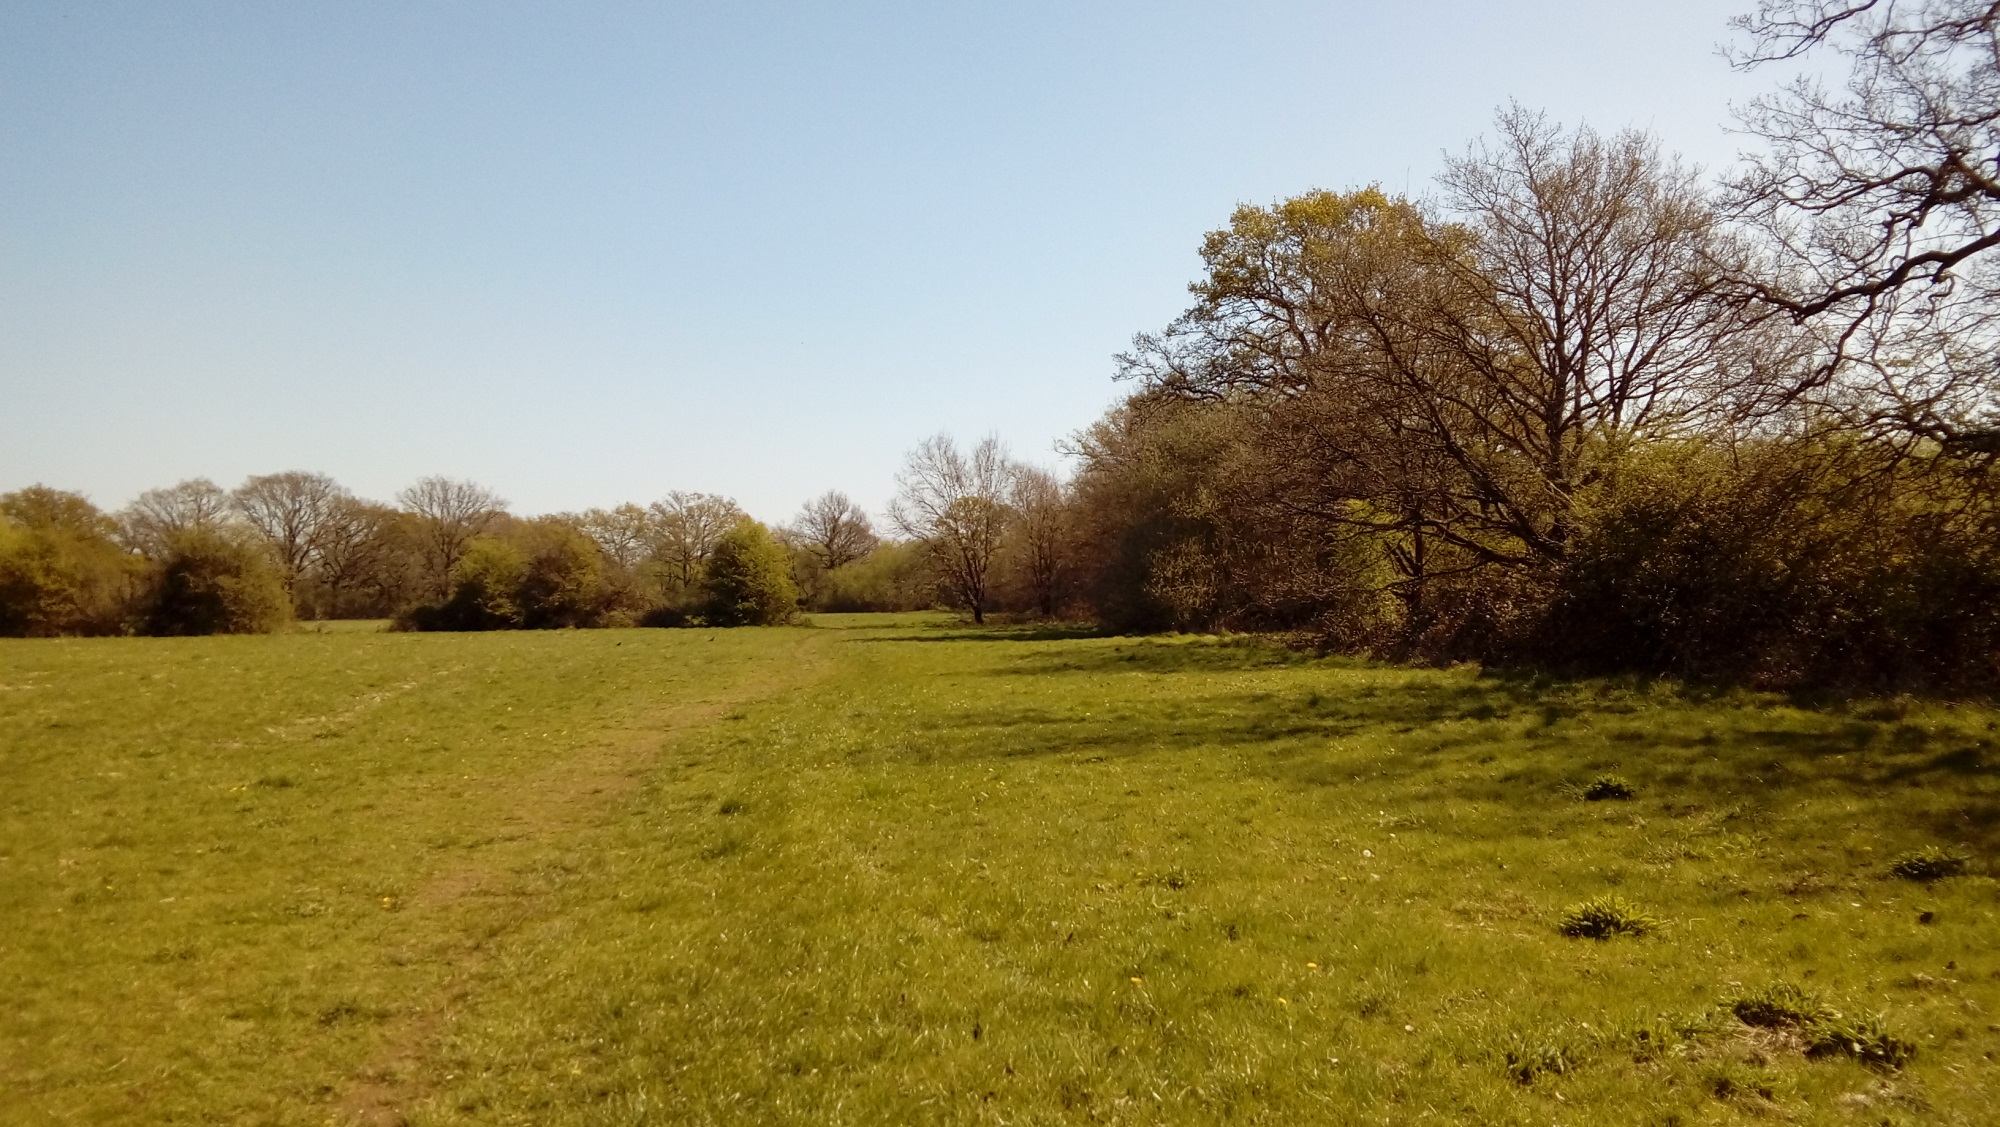 A grassy meadow with a line of trees to the right, on a sunny spring day with blue skies. Chobham, Surrey.